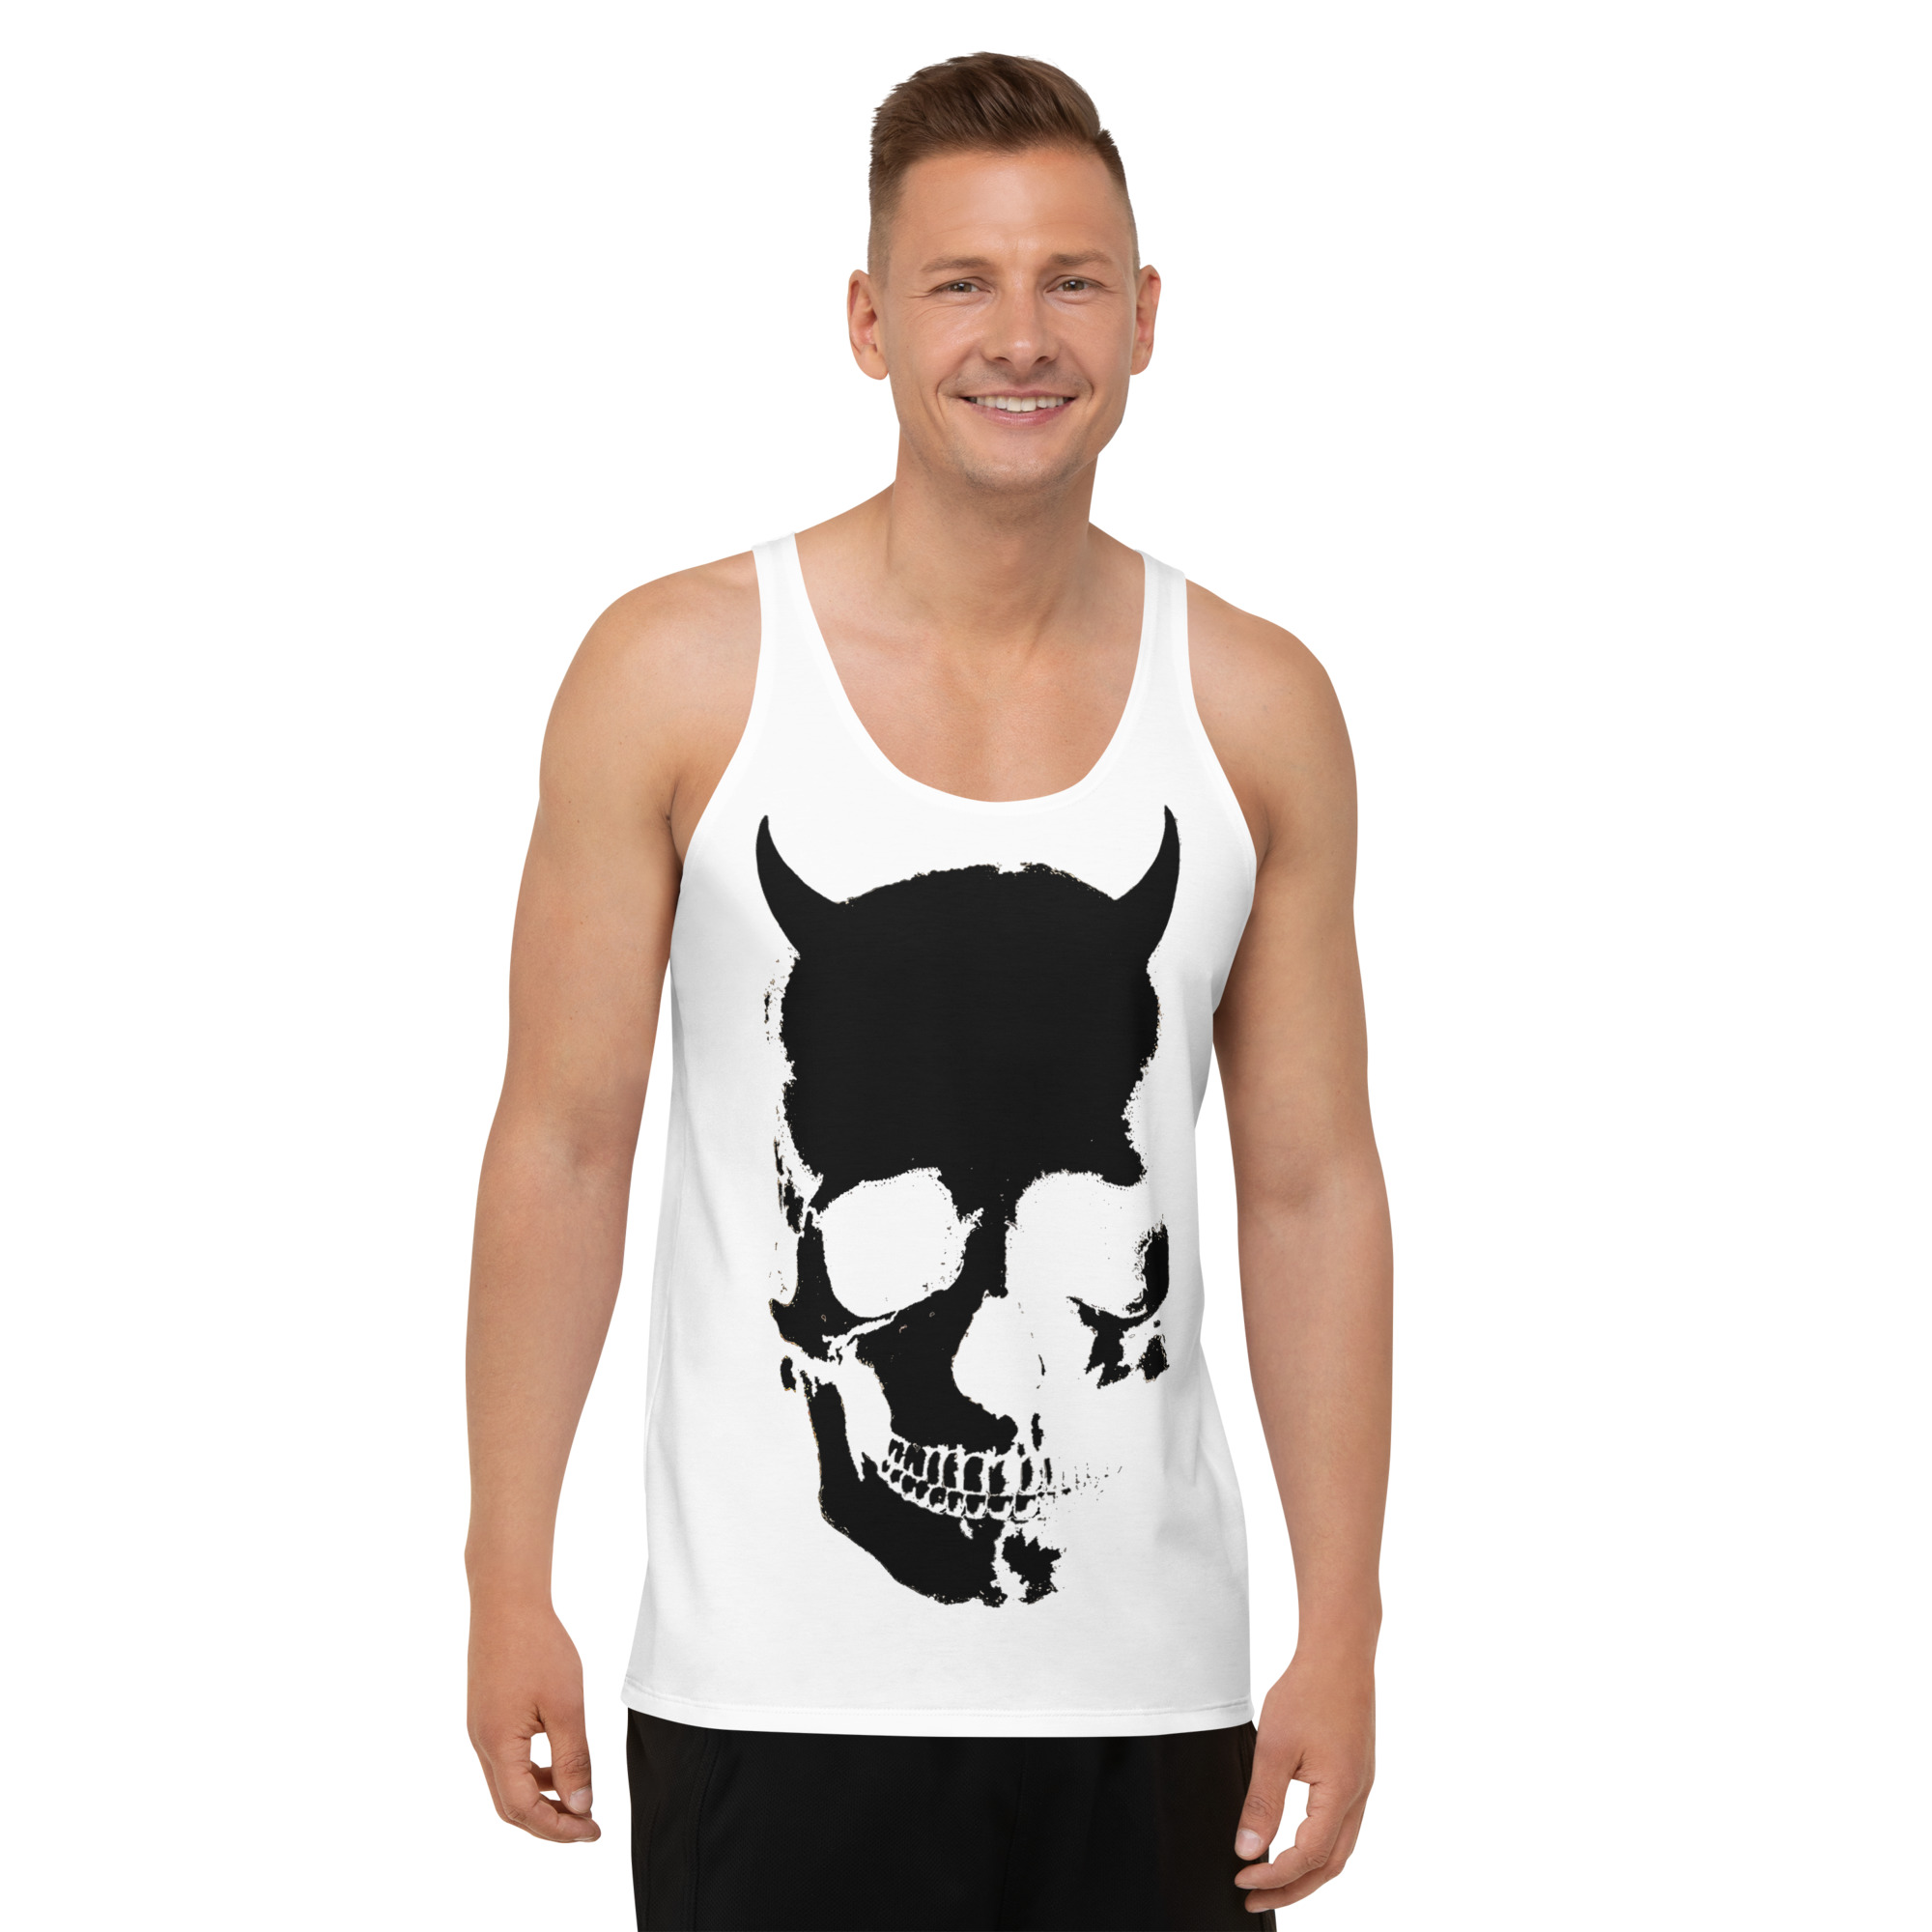 all-over-print-mens-tank-top-white-front-6356f3751b320.jpg